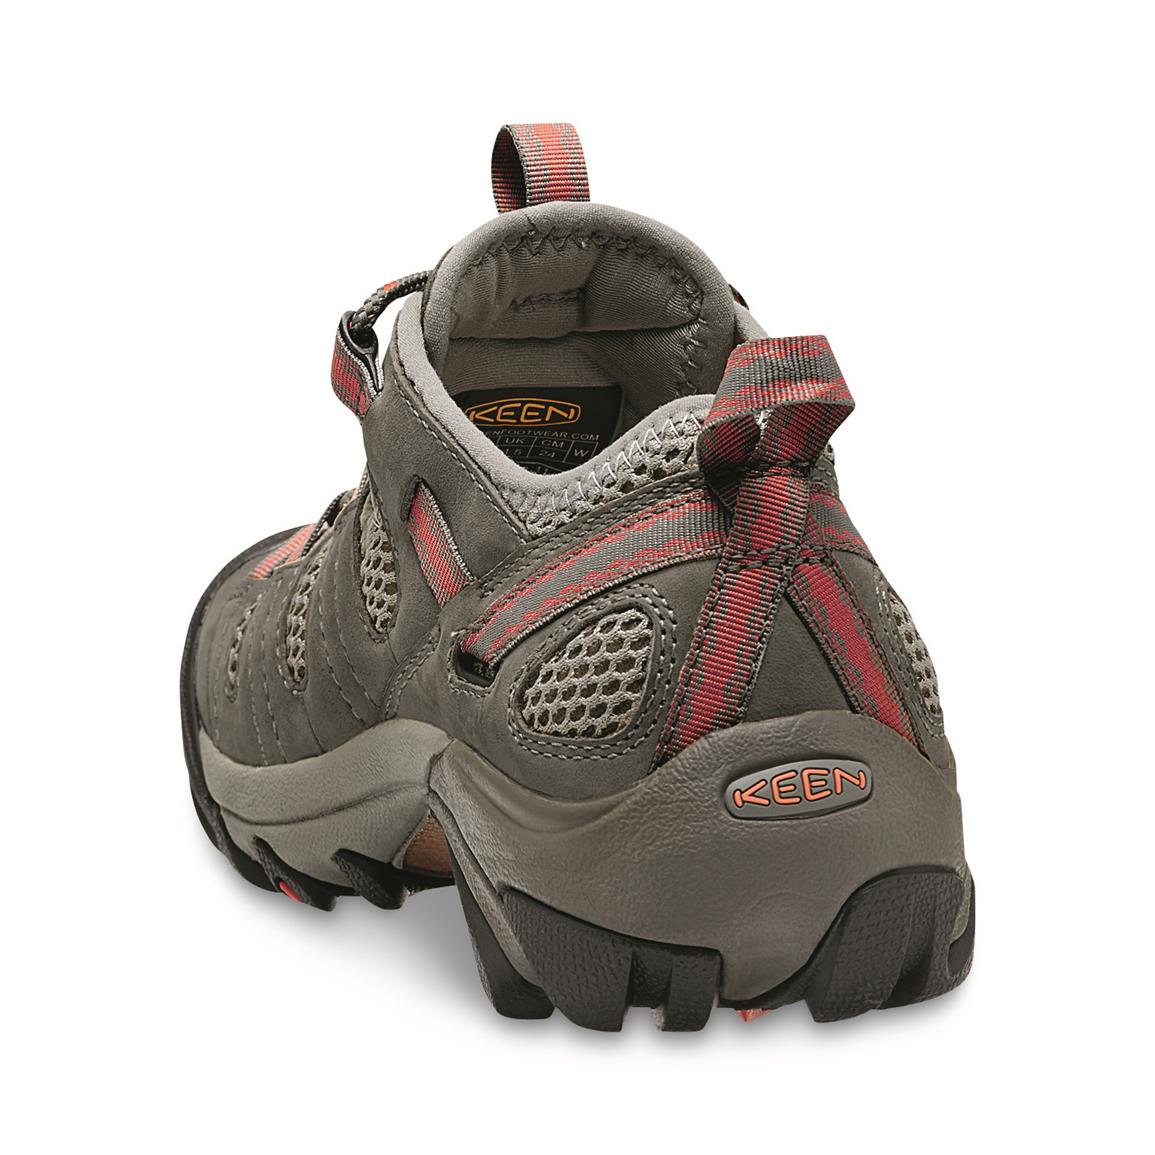 KEEN Utility Women's Atlanta Cool ESD Soft Toe Work Shoes - 678099, Work Boots at Sportsman's Guide